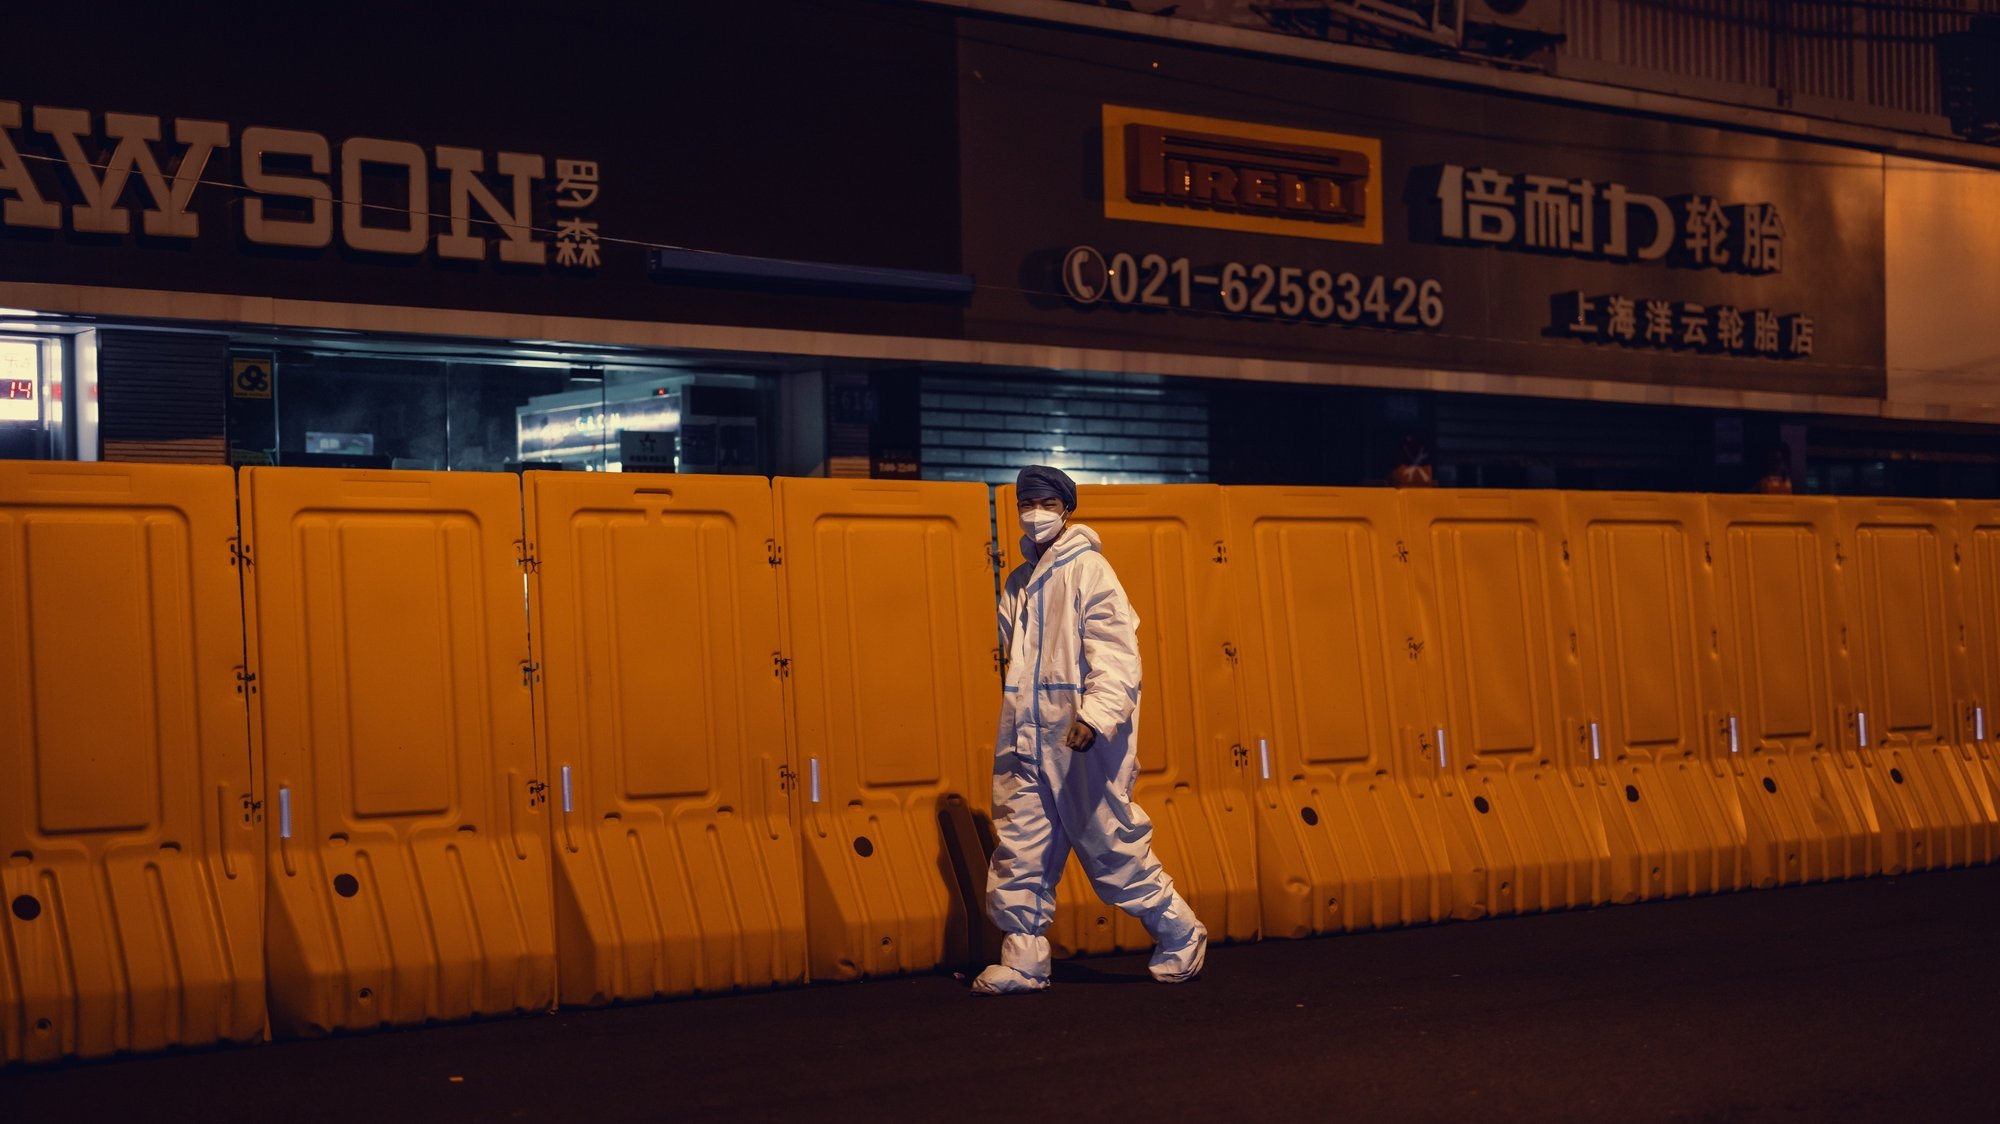 epa09977566 A man in protective gear walks in front of the quarantine barrier, amid the ongoing Covid-19 lockdown in Shanghai, China, 26 May 2022. Shanghai city reported one COVID-19 death, 48 locally transmitted cases, and 290 local asymptomatic infections, according to the Shanghai Health Commission on 26 May 2022. Grade 11 and 12 senior high school students will return to campus on 6 June, and Grade 9 on 13 June, Shanghai Education Commission reported. Students must take an antigen test before school, a PCR test before leaving, and a temperature check twice a day at school. Offline classes are optional.  EPA/ALEX PLAVEVSKI